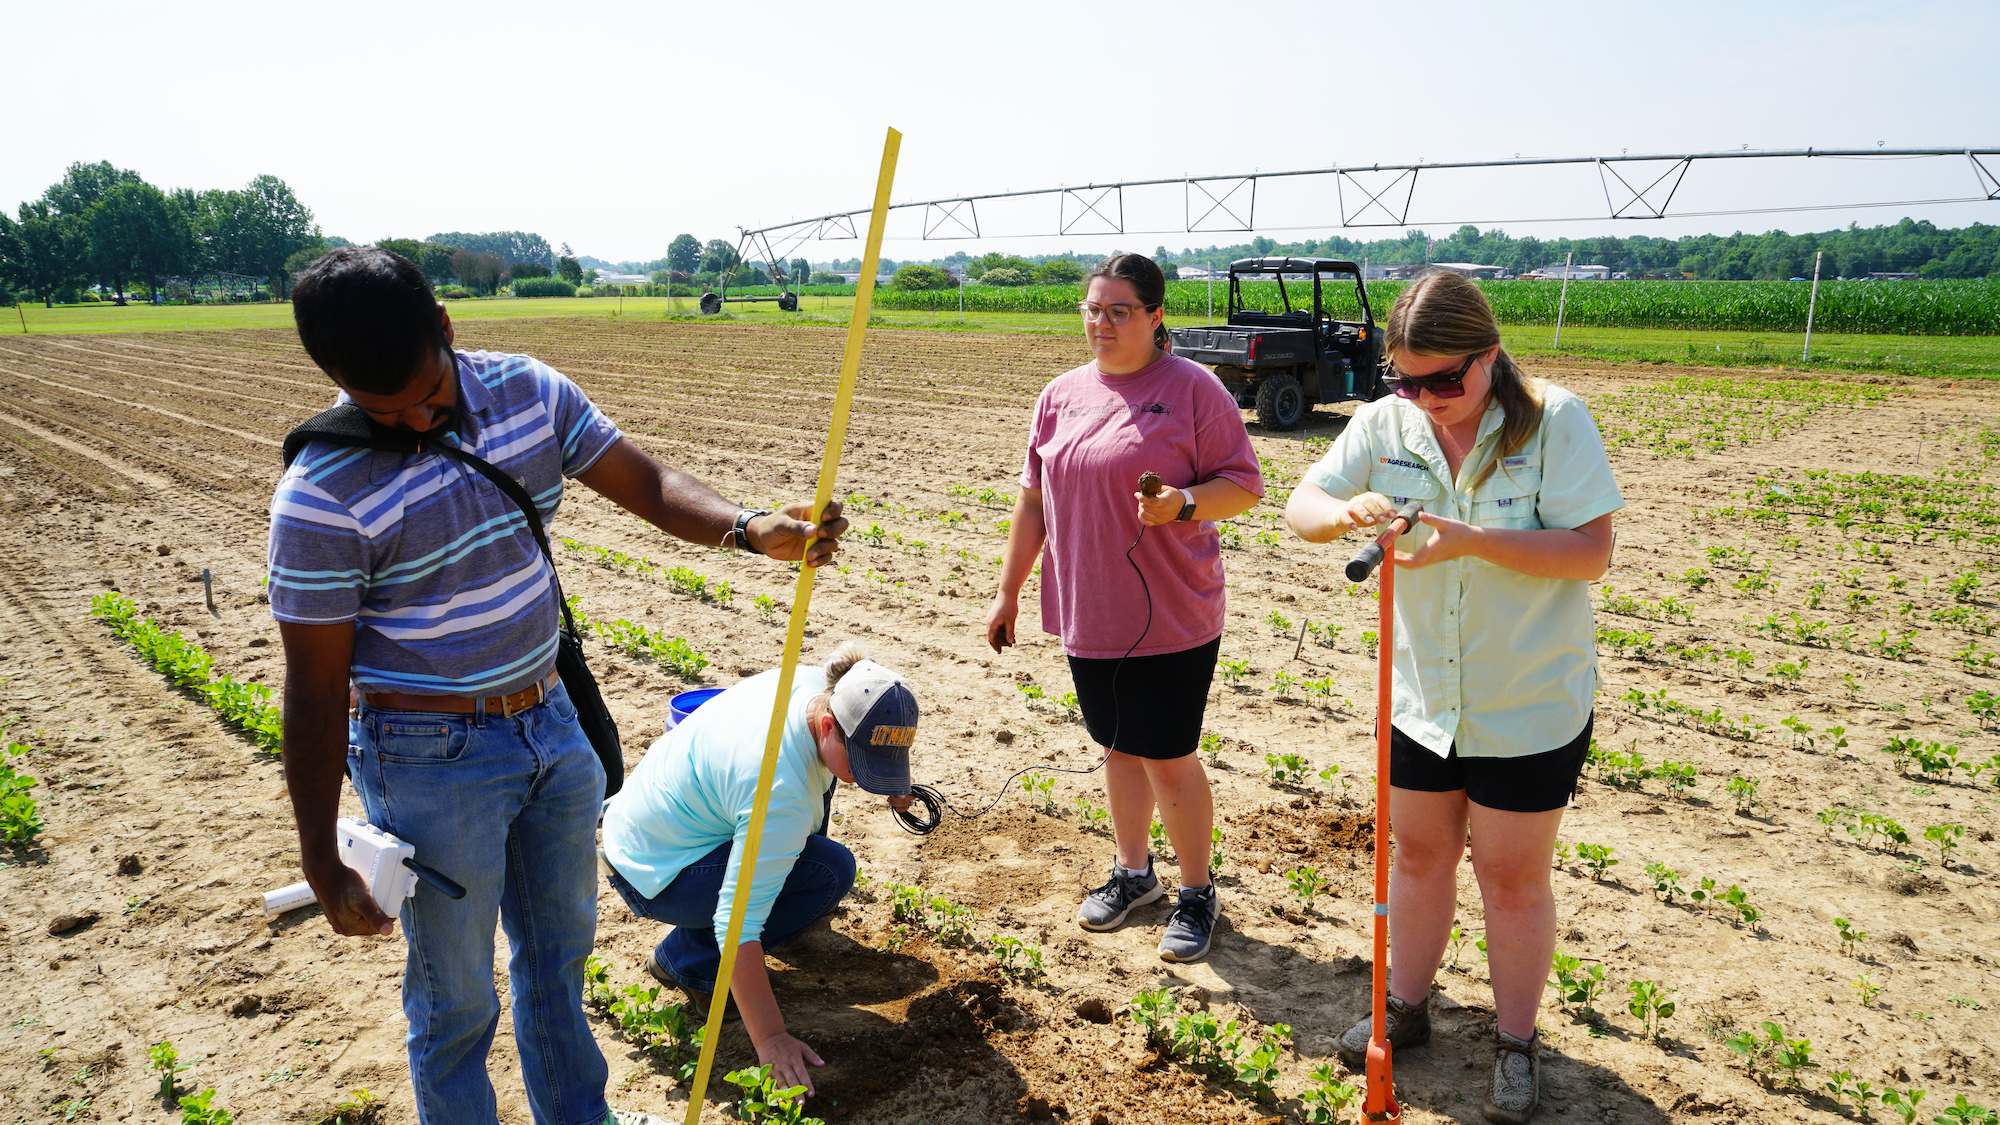 A group of interns install sensors in a field of newly emerging plants